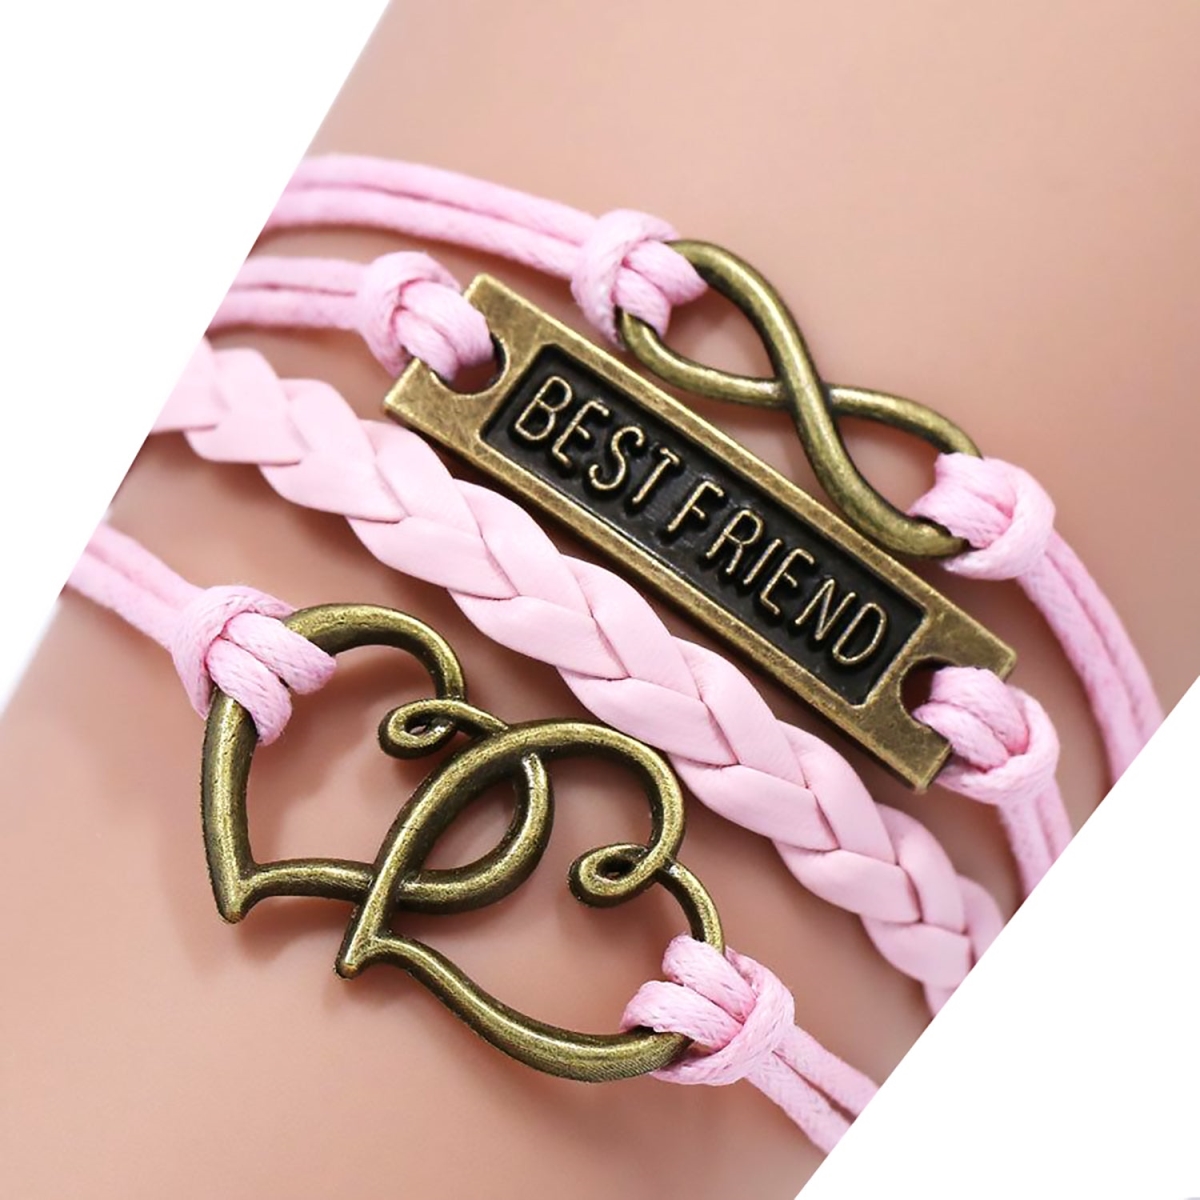 Picture of Adore 30386635 Braided Infinity Heart Best Friend Bracelet, Pink